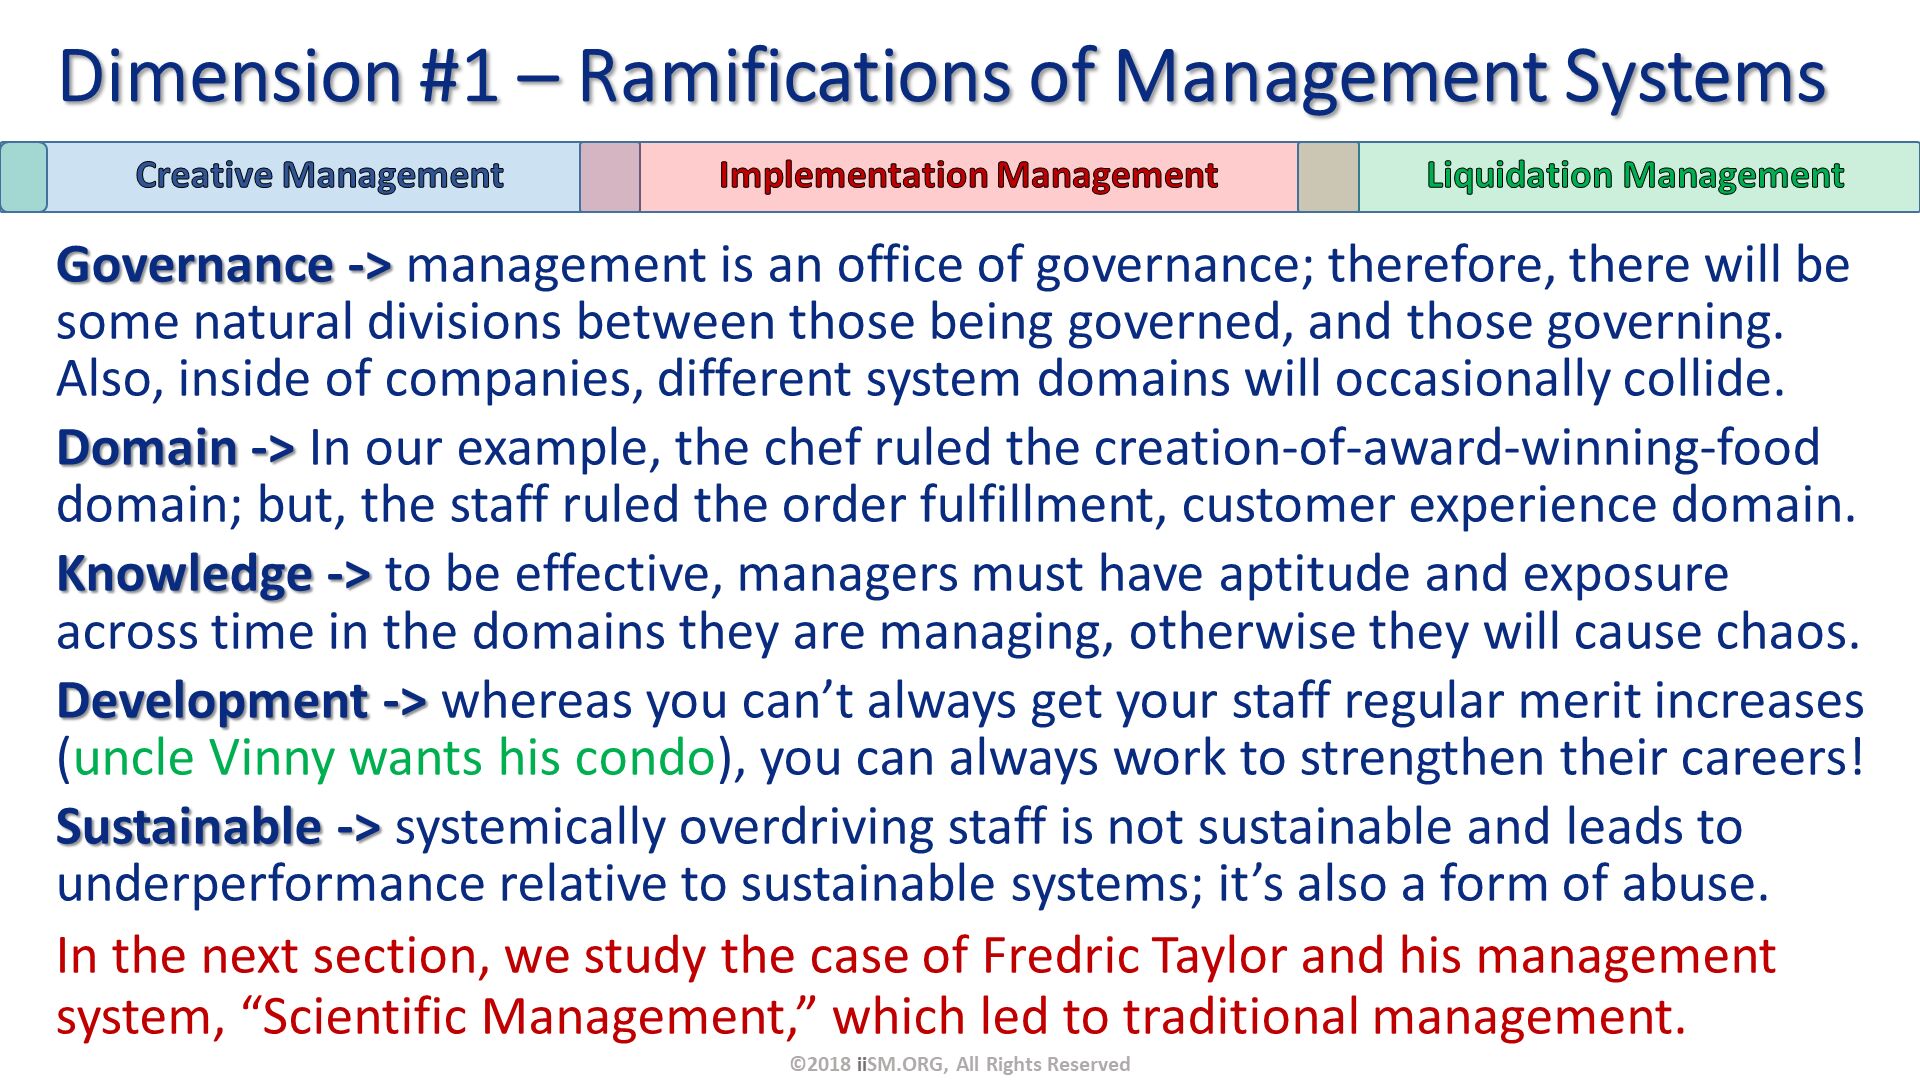 Governance -> management is an office of governance; therefore, there will be some natural divisions between those being governed, and those governing.  Also, inside of companies, different system domains will occasionally collide.
Domain -> In our example, the chef ruled the creation-of-award-winning-food domain; but, the staff ruled the order fulfillment, customer experience domain.
Knowledge -> to be effective, managers must have aptitude and exposure across time in the domains they are managing, otherwise they will cause chaos.
Development -> whereas you can’t always get your staff regular merit increases (uncle Vinny wants his condo), you can always work to strengthen their careers!
Sustainable -> systemically overdriving staff is not sustainable and leads to underperformance relative to sustainable systems; it’s also a form of abuse. 
In the next section, we study the case of Fredric Taylor and his management system, “Scientific Management,” which led to traditional management. Dimension #1 – Ramifications of Management Systems. ©2018 iiSM.ORG, All Rights Reserved. 